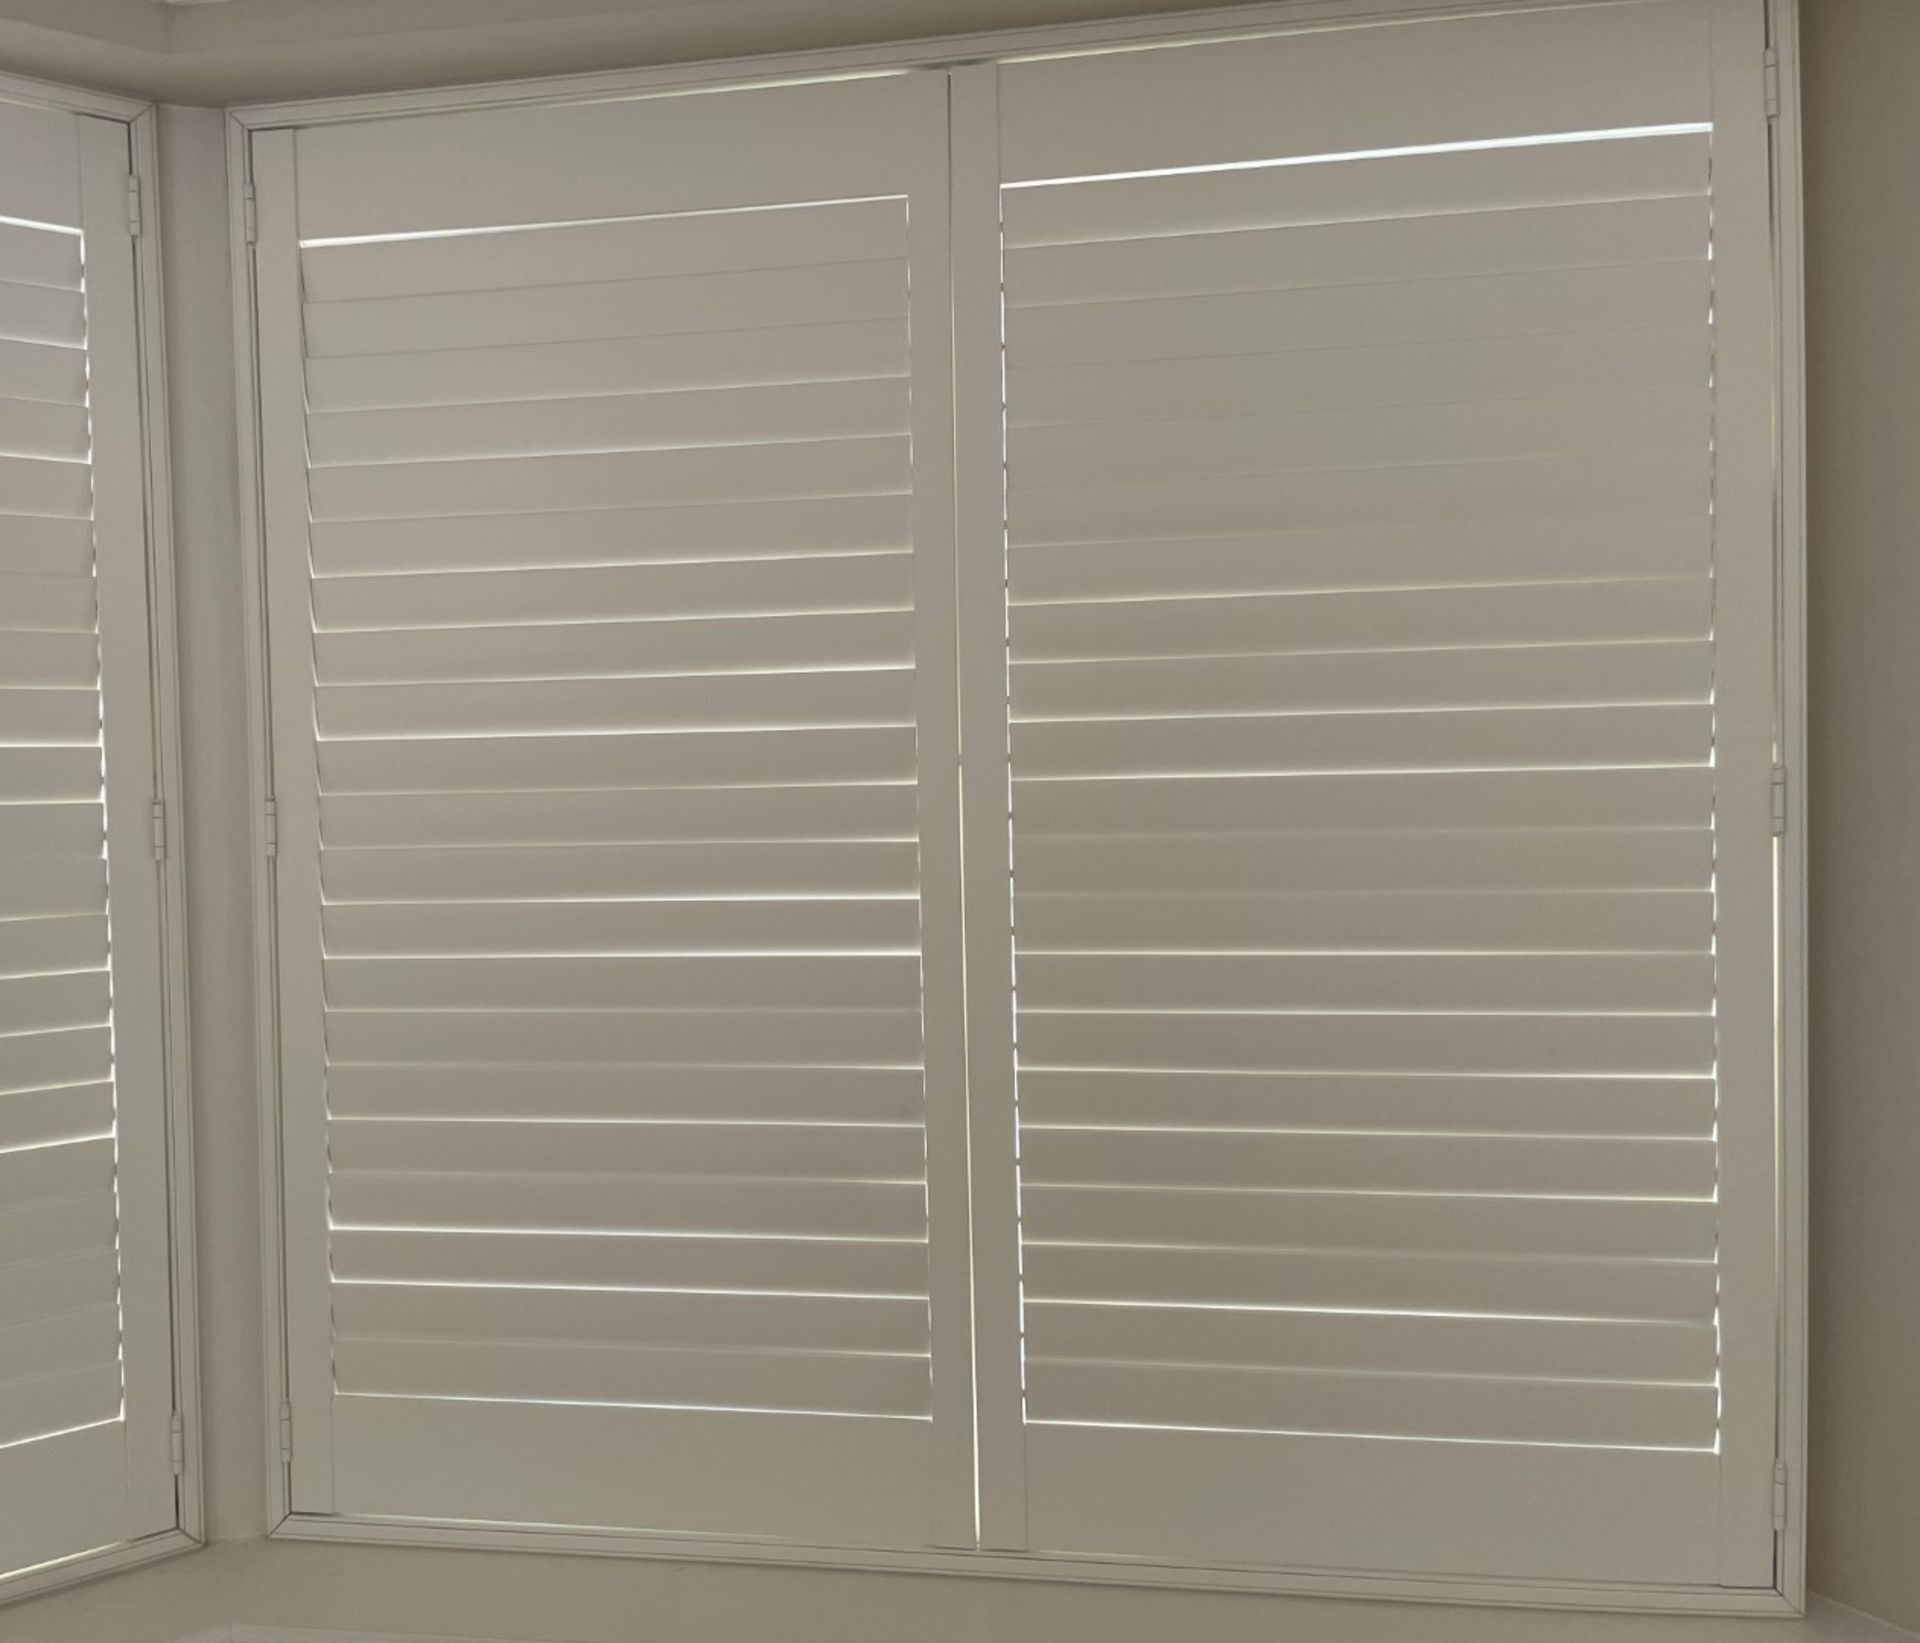 1 x Hardwood Timber Double Glazed Window Frames fitted with Shutter Blinds, In White - Ref: PAN104 - Image 11 of 12